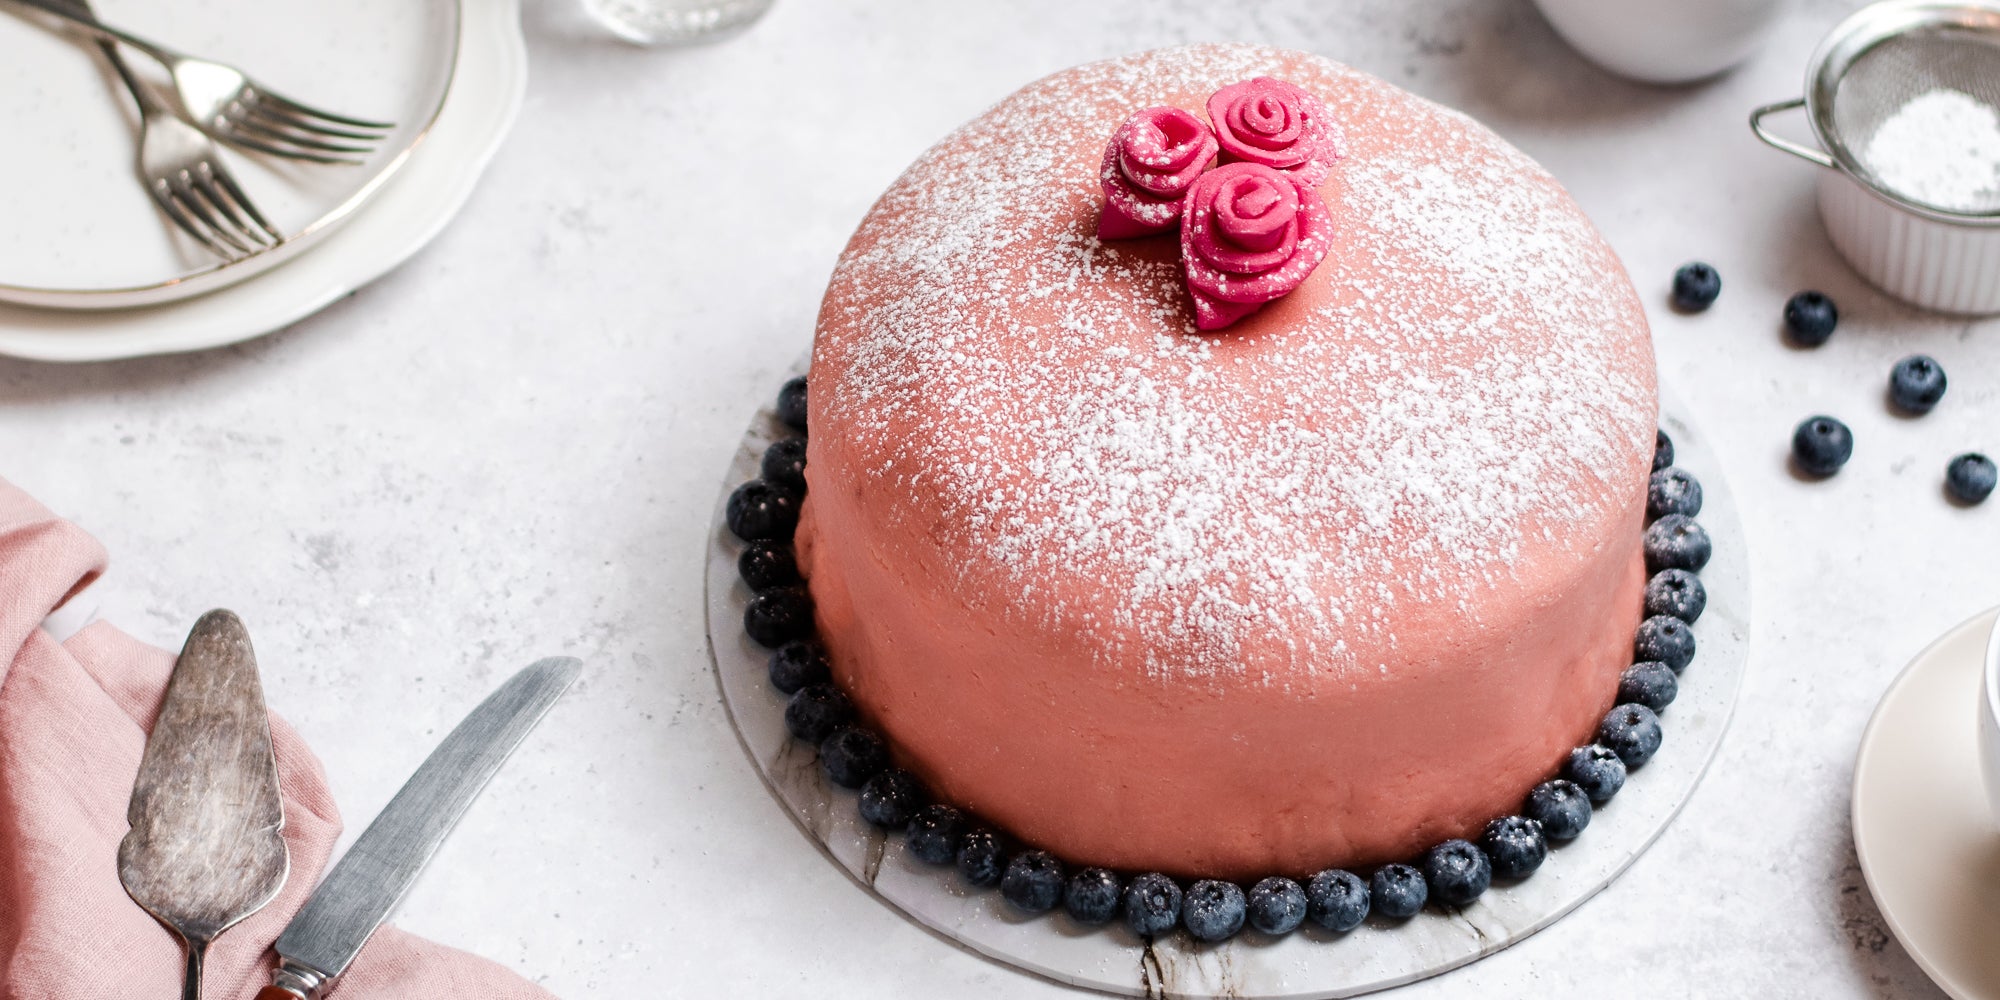 Close up view of Prinsesstarta surrounded with blueberries, and a cake knife to serve. Dusted with icing sugar and topped with fondant flowers